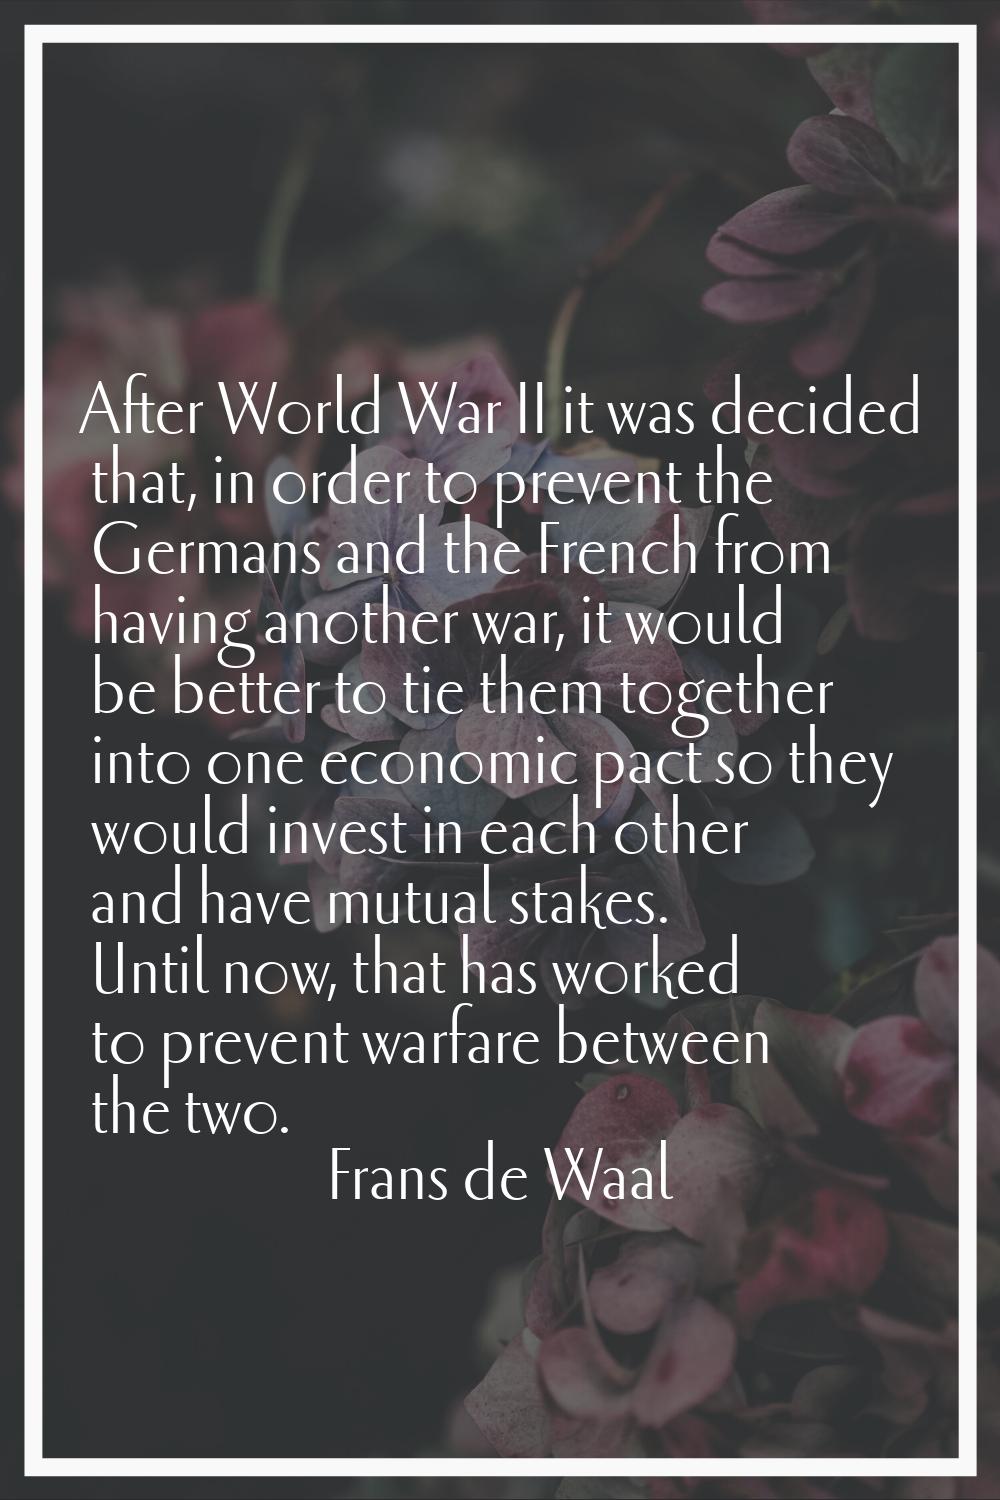 After World War II it was decided that, in order to prevent the Germans and the French from having 